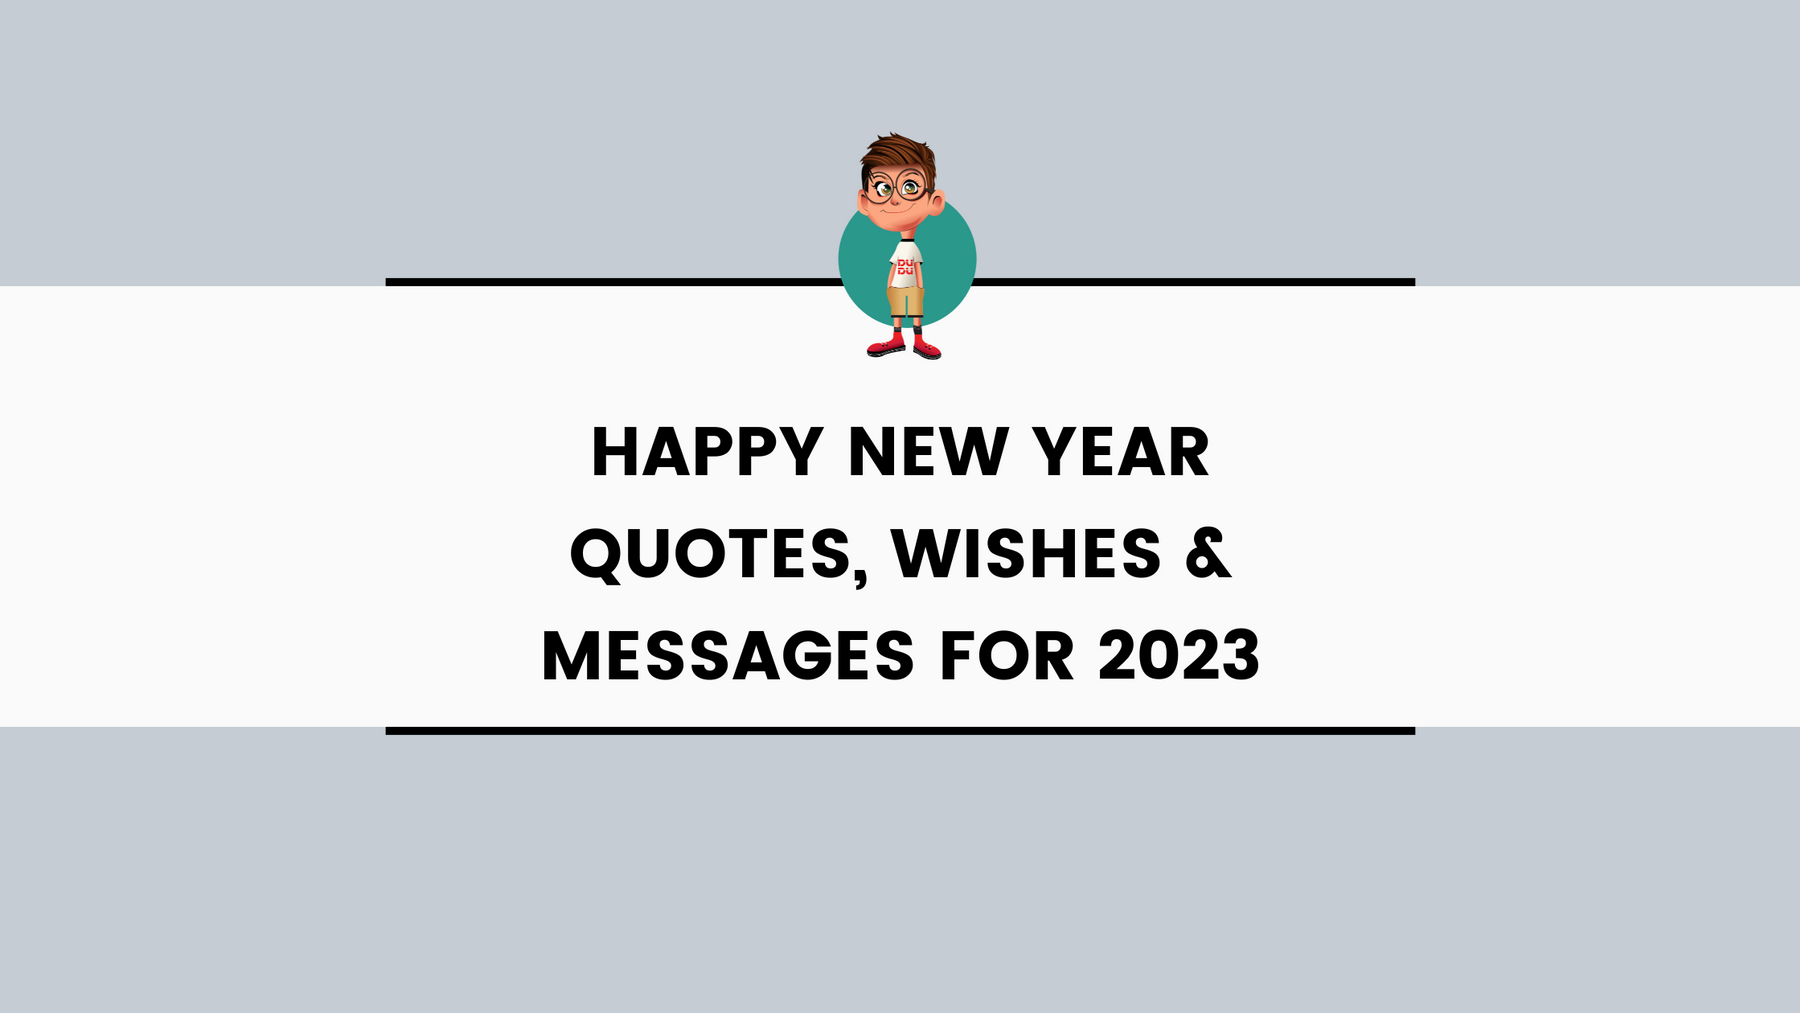 Happy New Year Quotes, Wishes & Messages for 2023